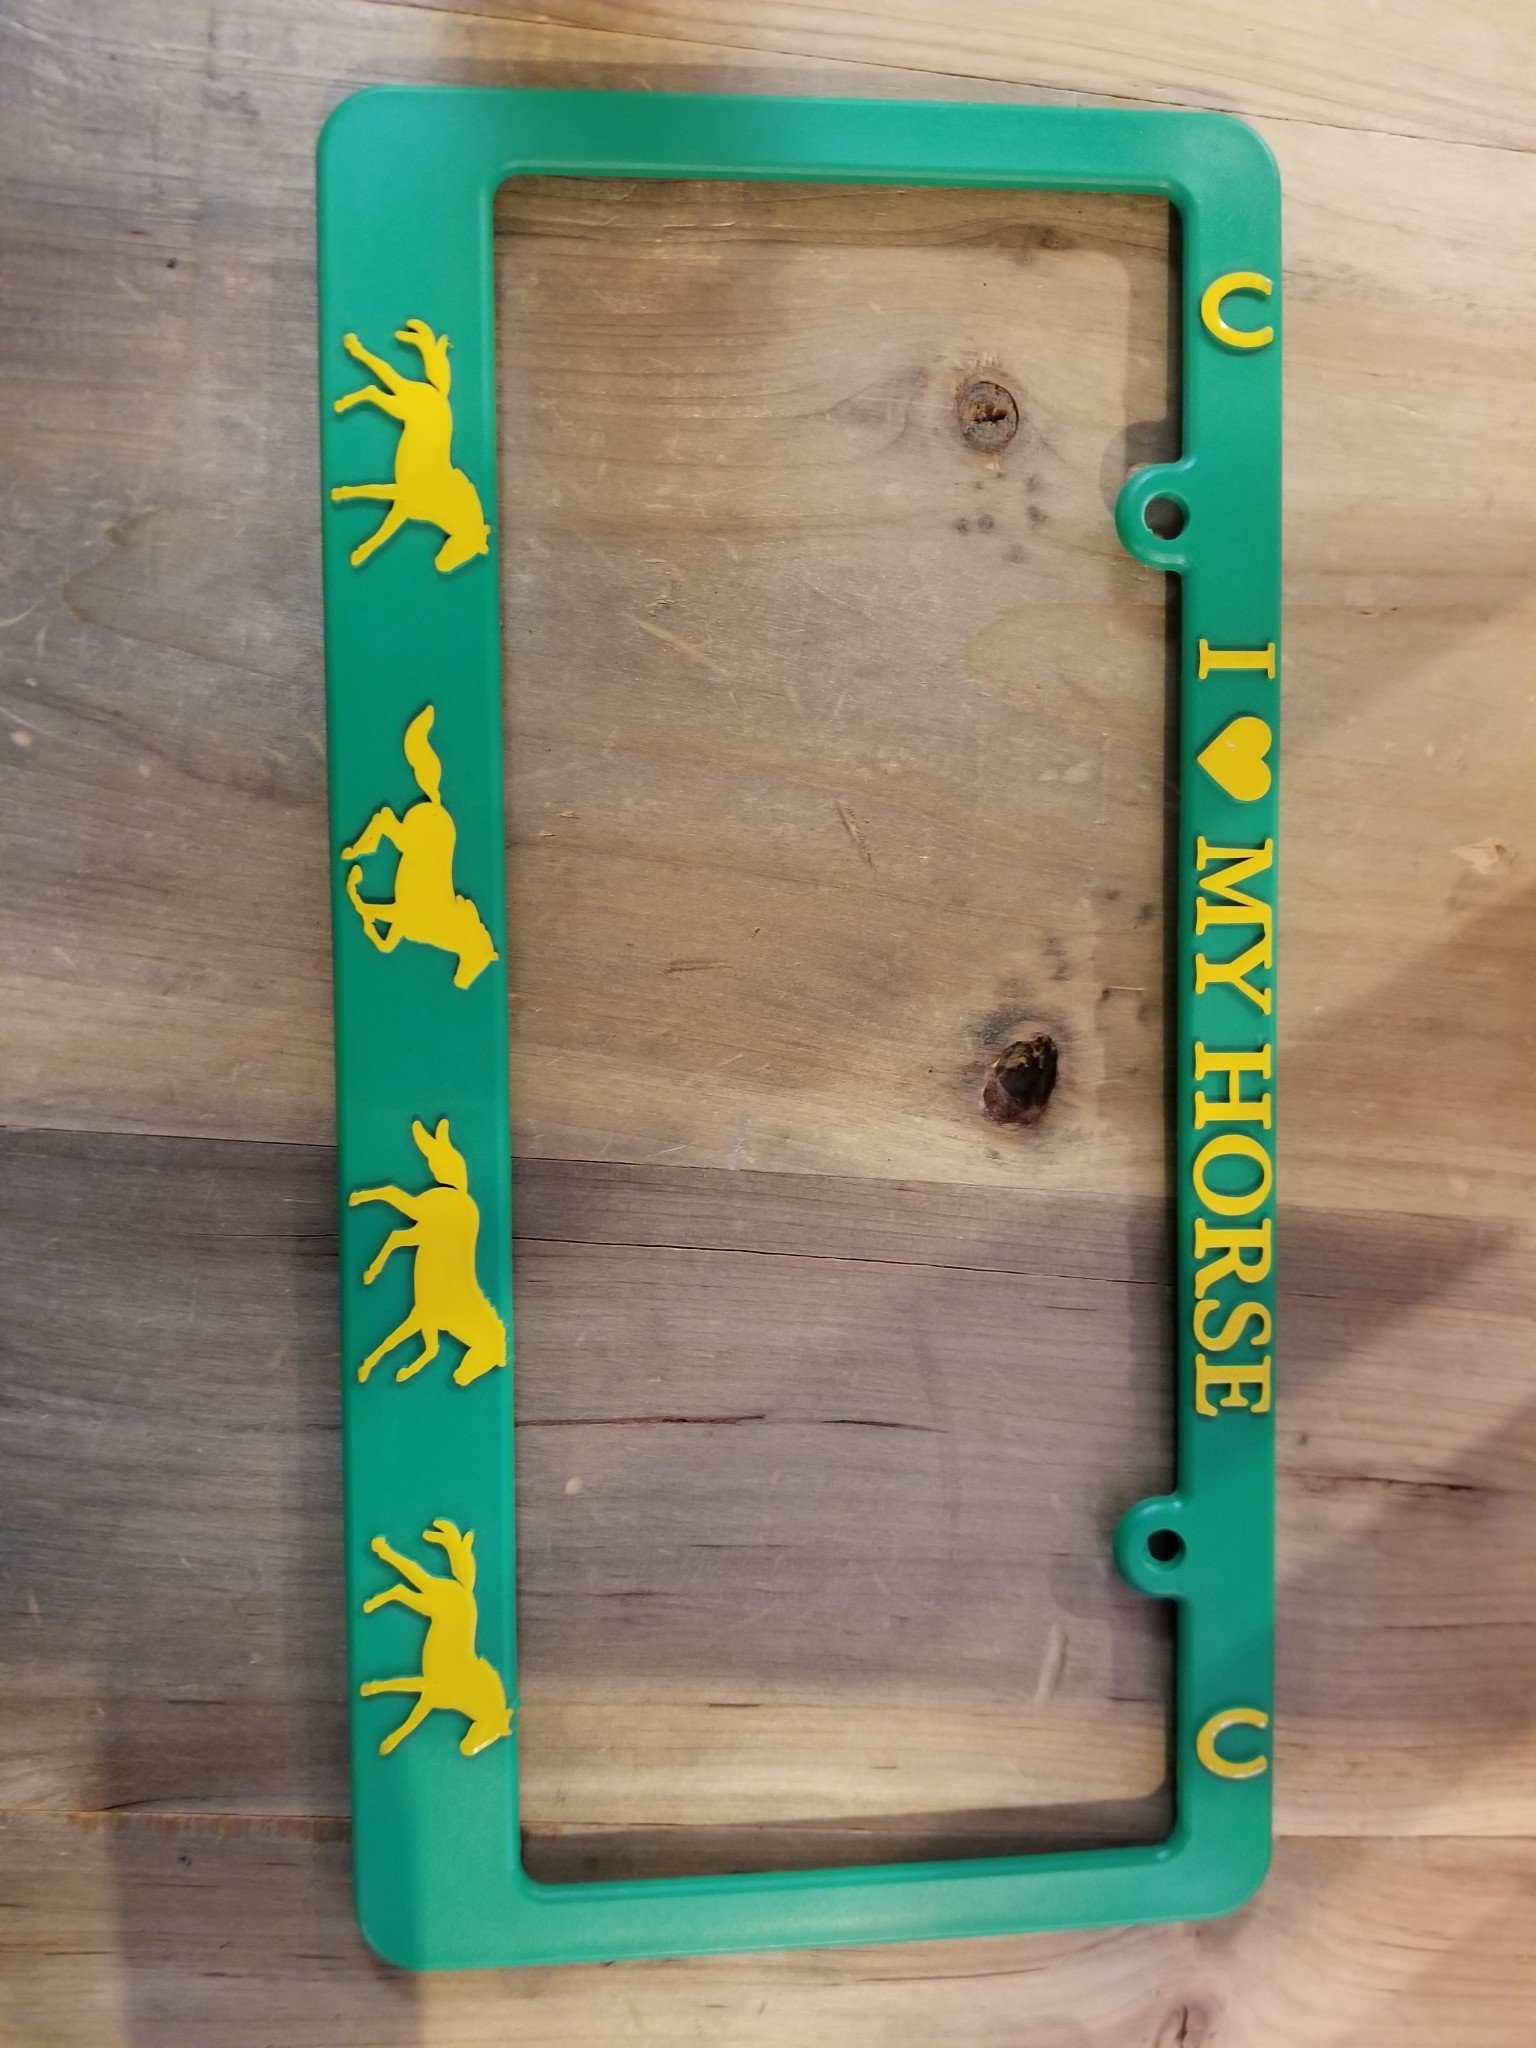 I Love My Horse License Plate Frame Grn/Yellow Horses (Reg $12.95 now $8 OFF!)